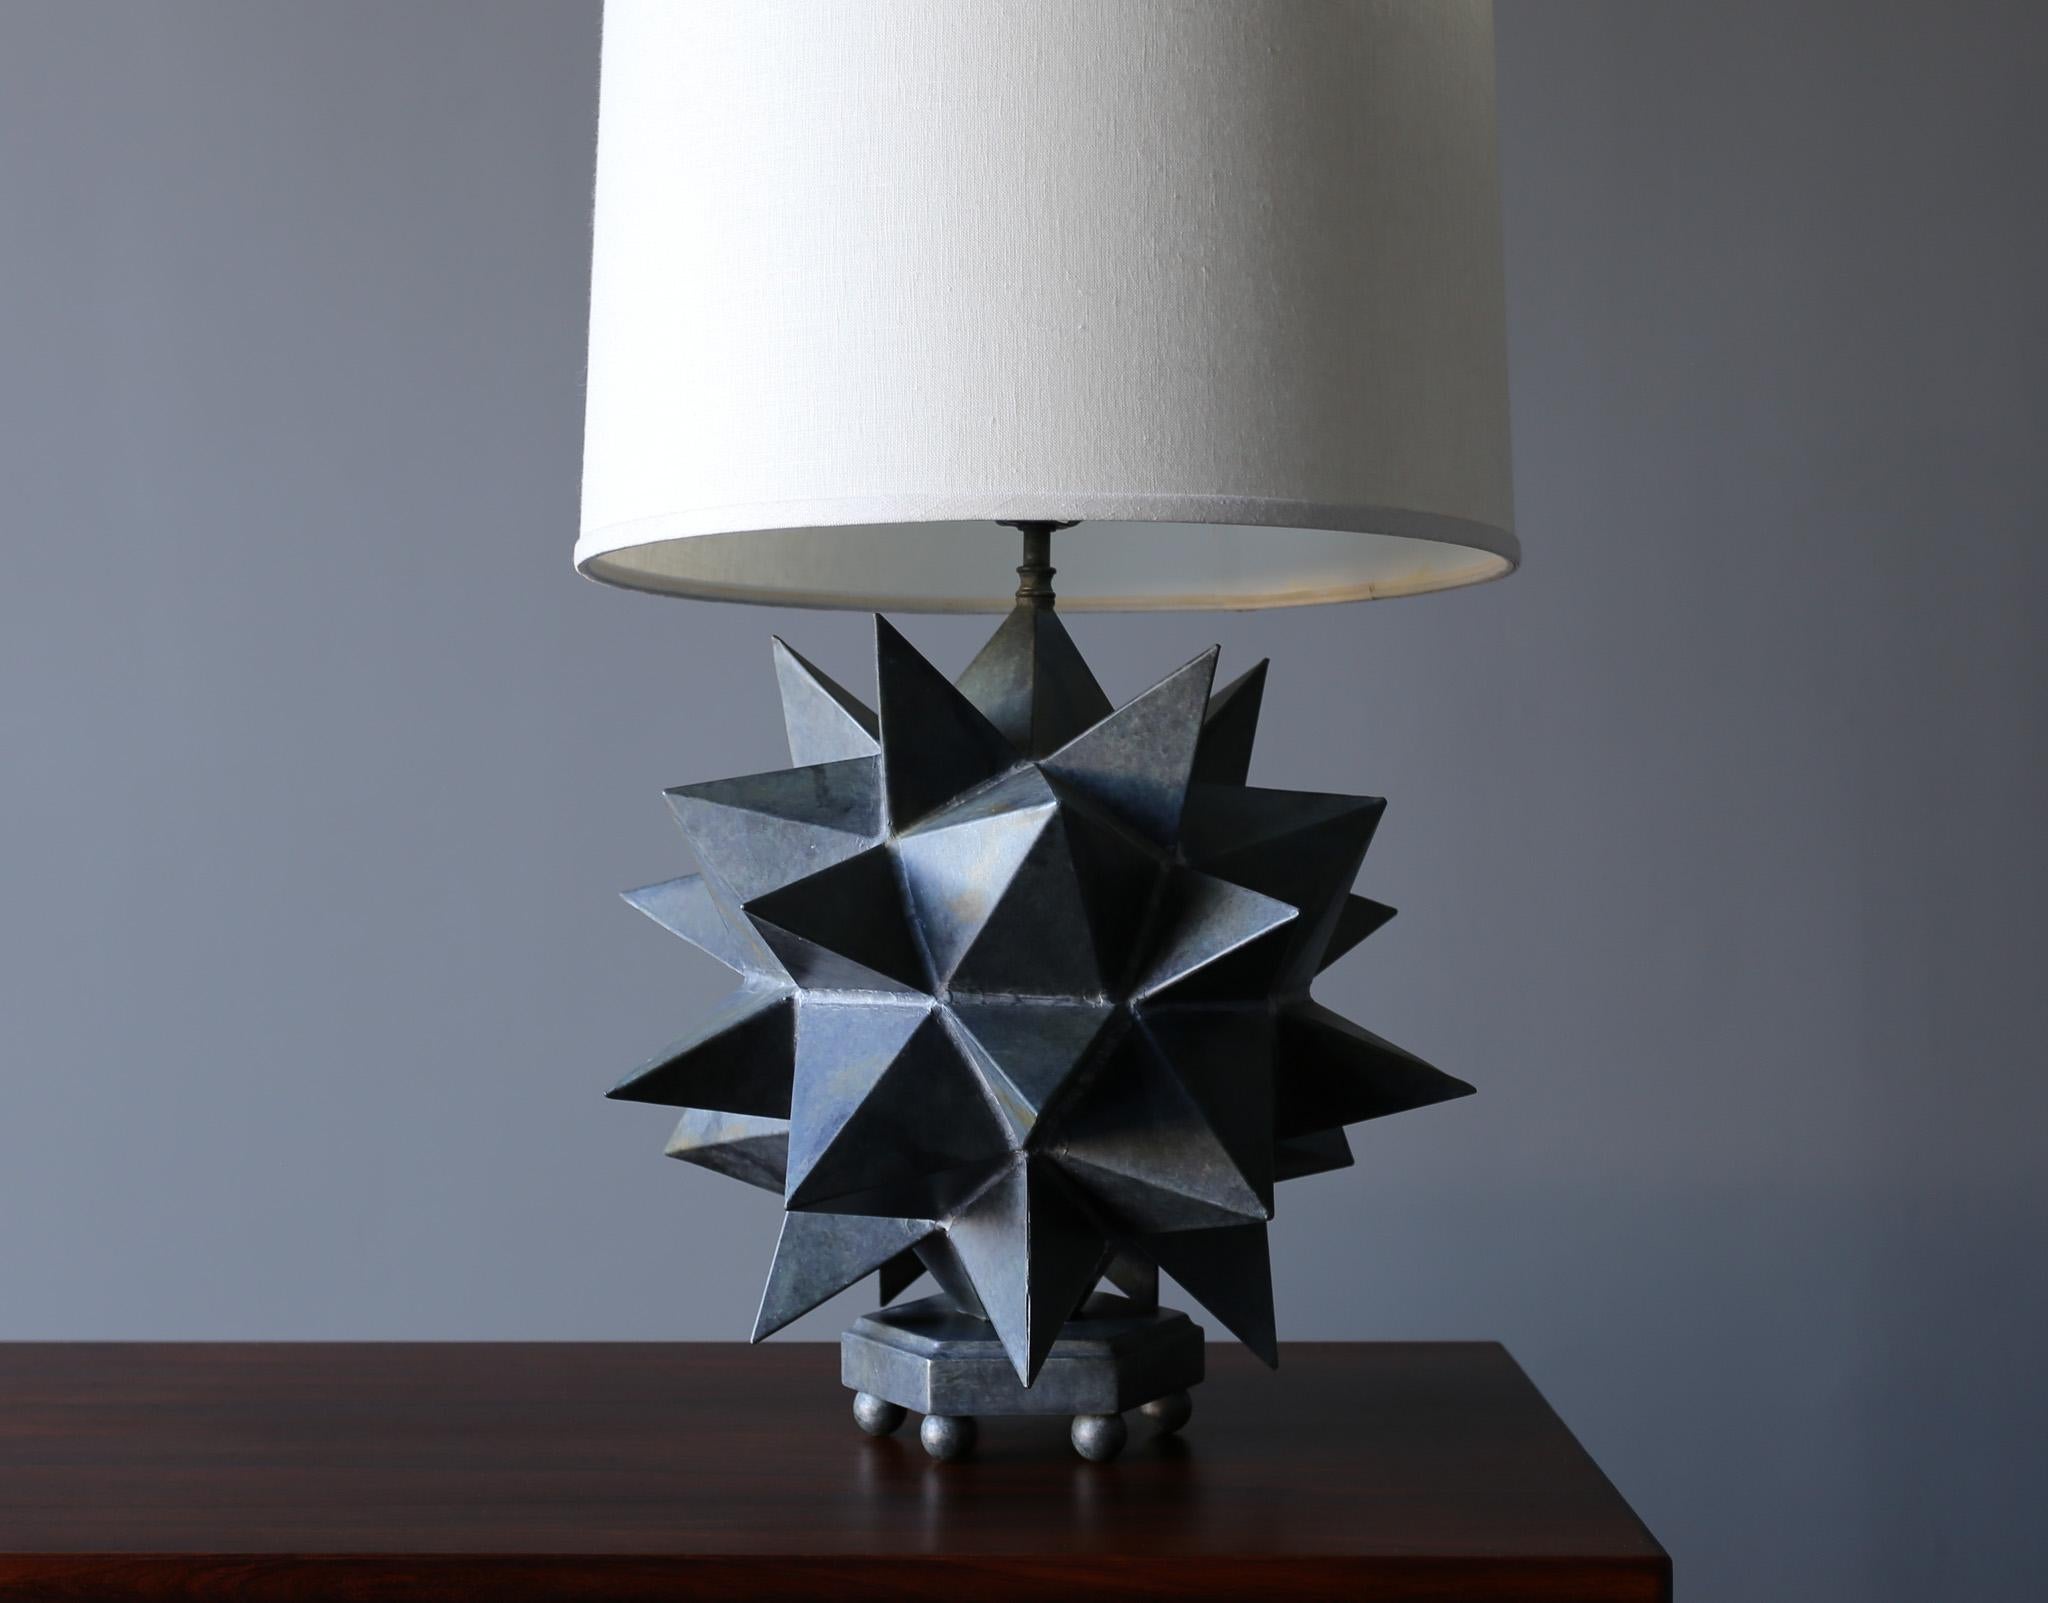 Hand built sculptural star table lamp, circa 1975. Thin gauge patinated welded metal construction.

Measures: 
16